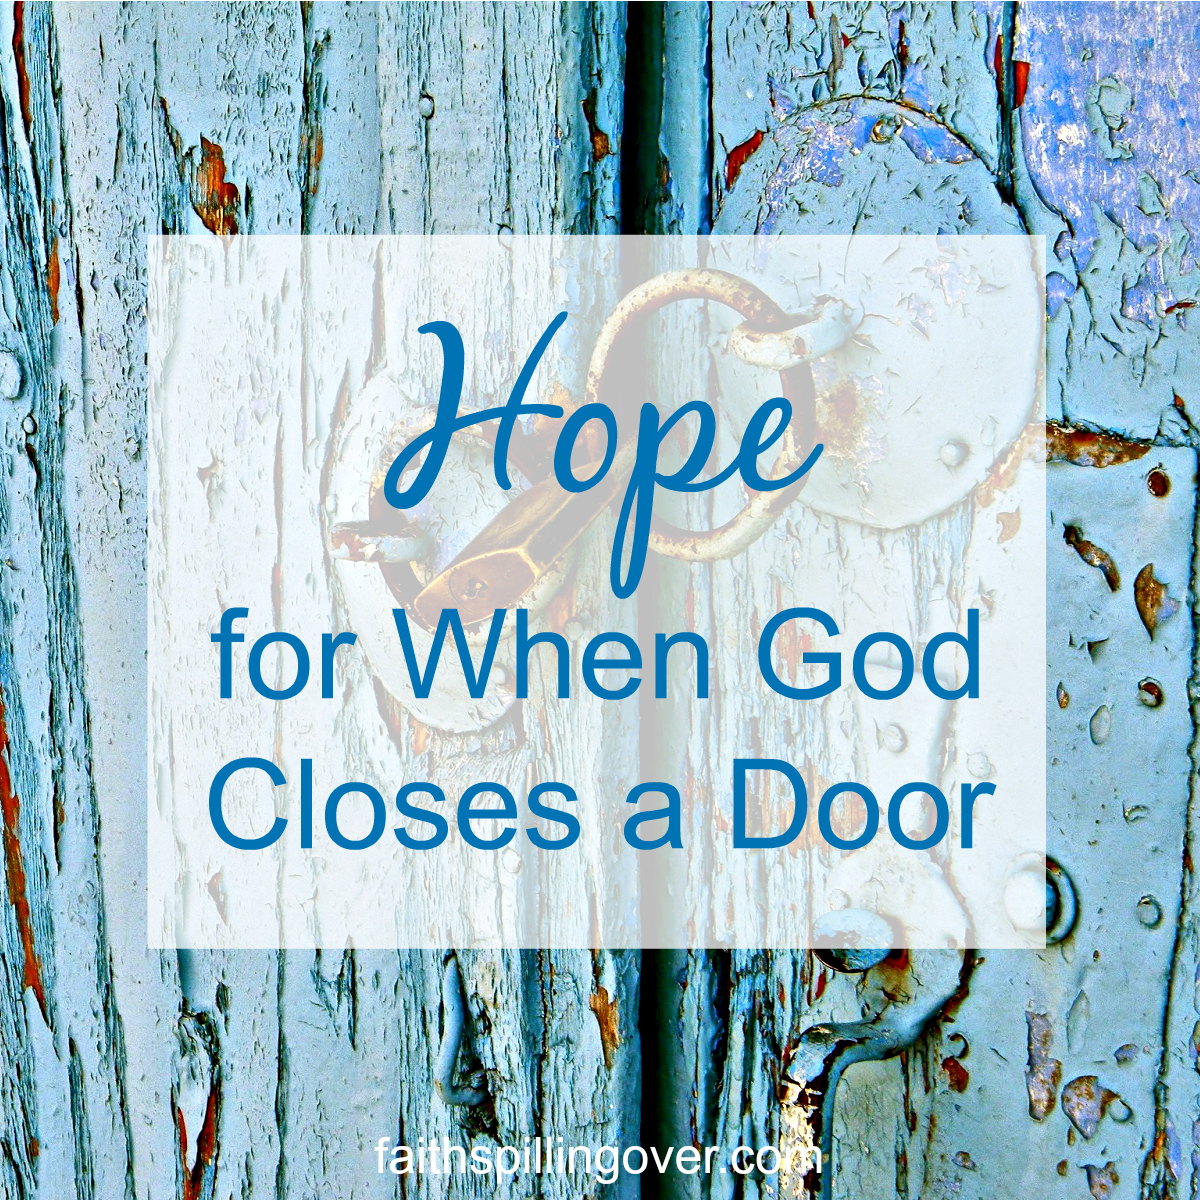 Closed doors disappoint us, but we can always trust God's leading. If He never closed any doors, we wouldn't know which ones to go through.